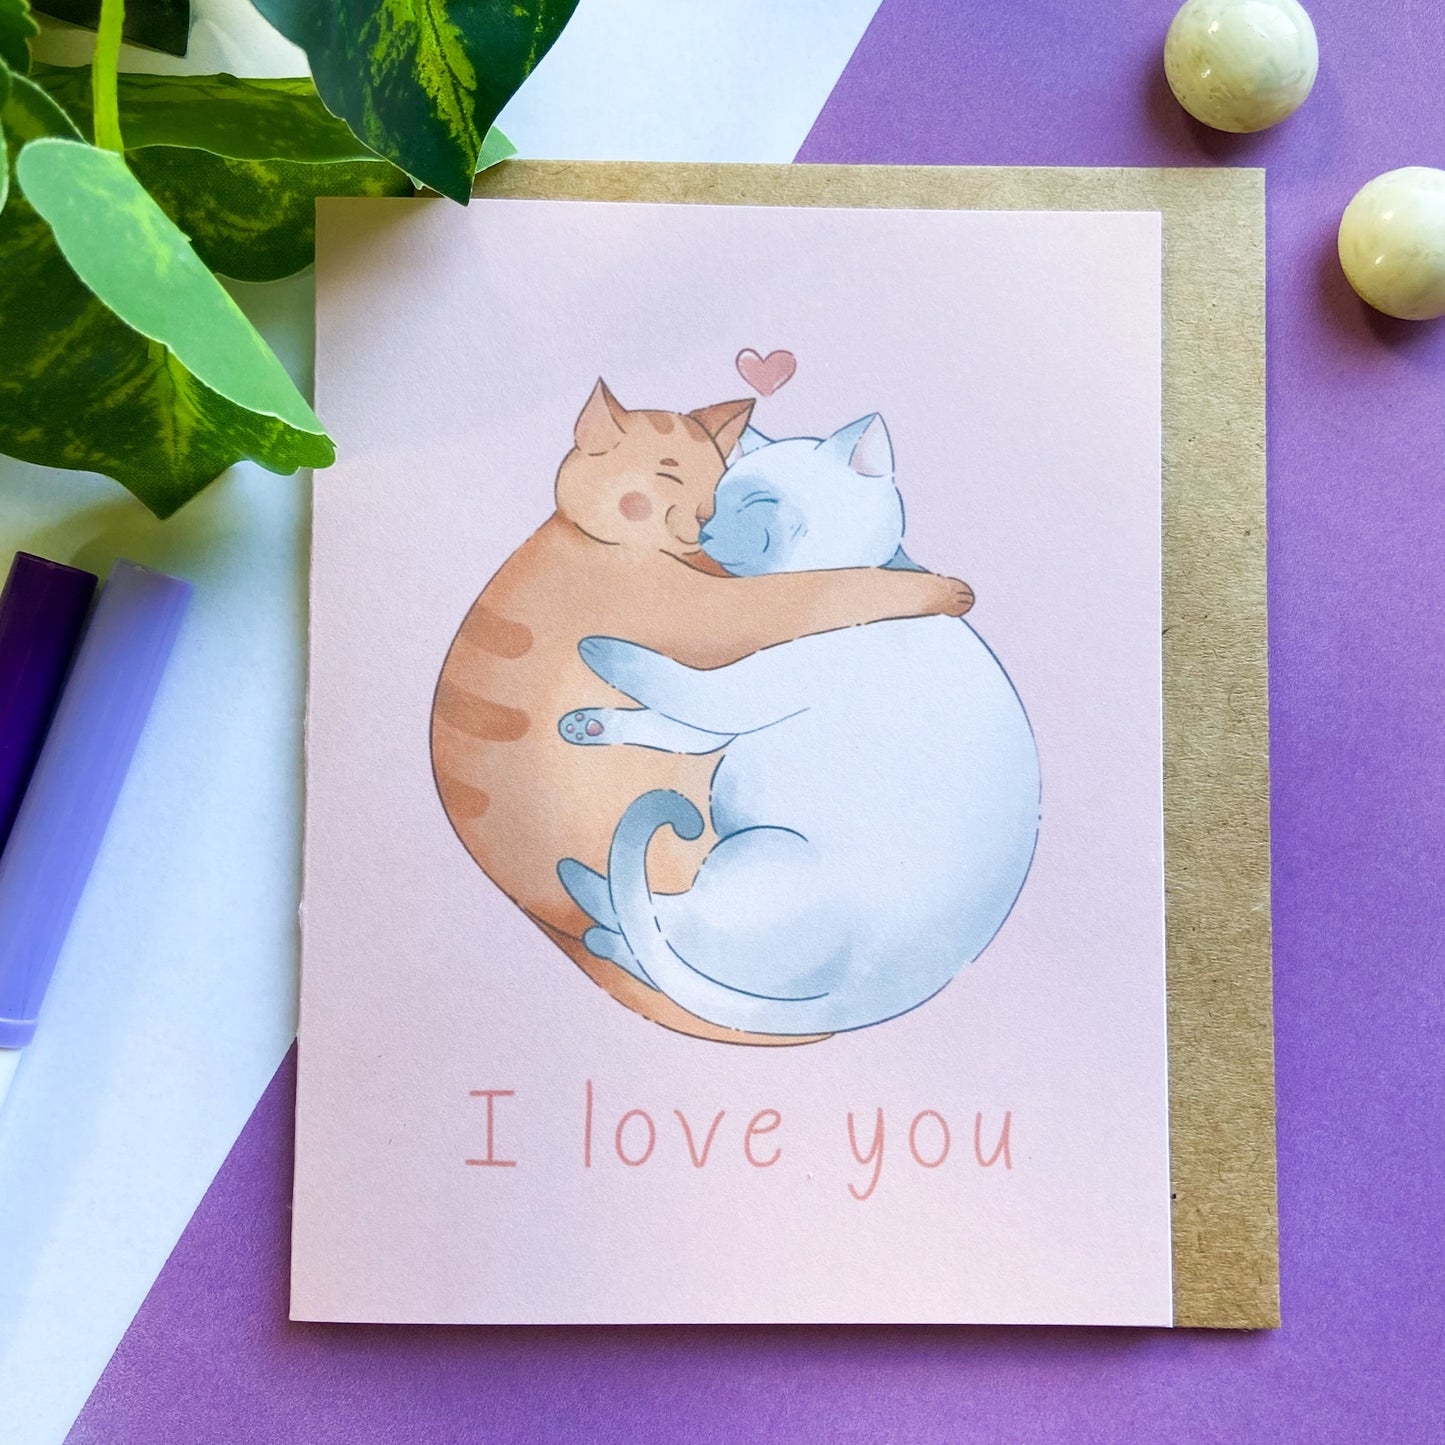 Hugging Cats Blank Greeting Card With Vinyl Sticker